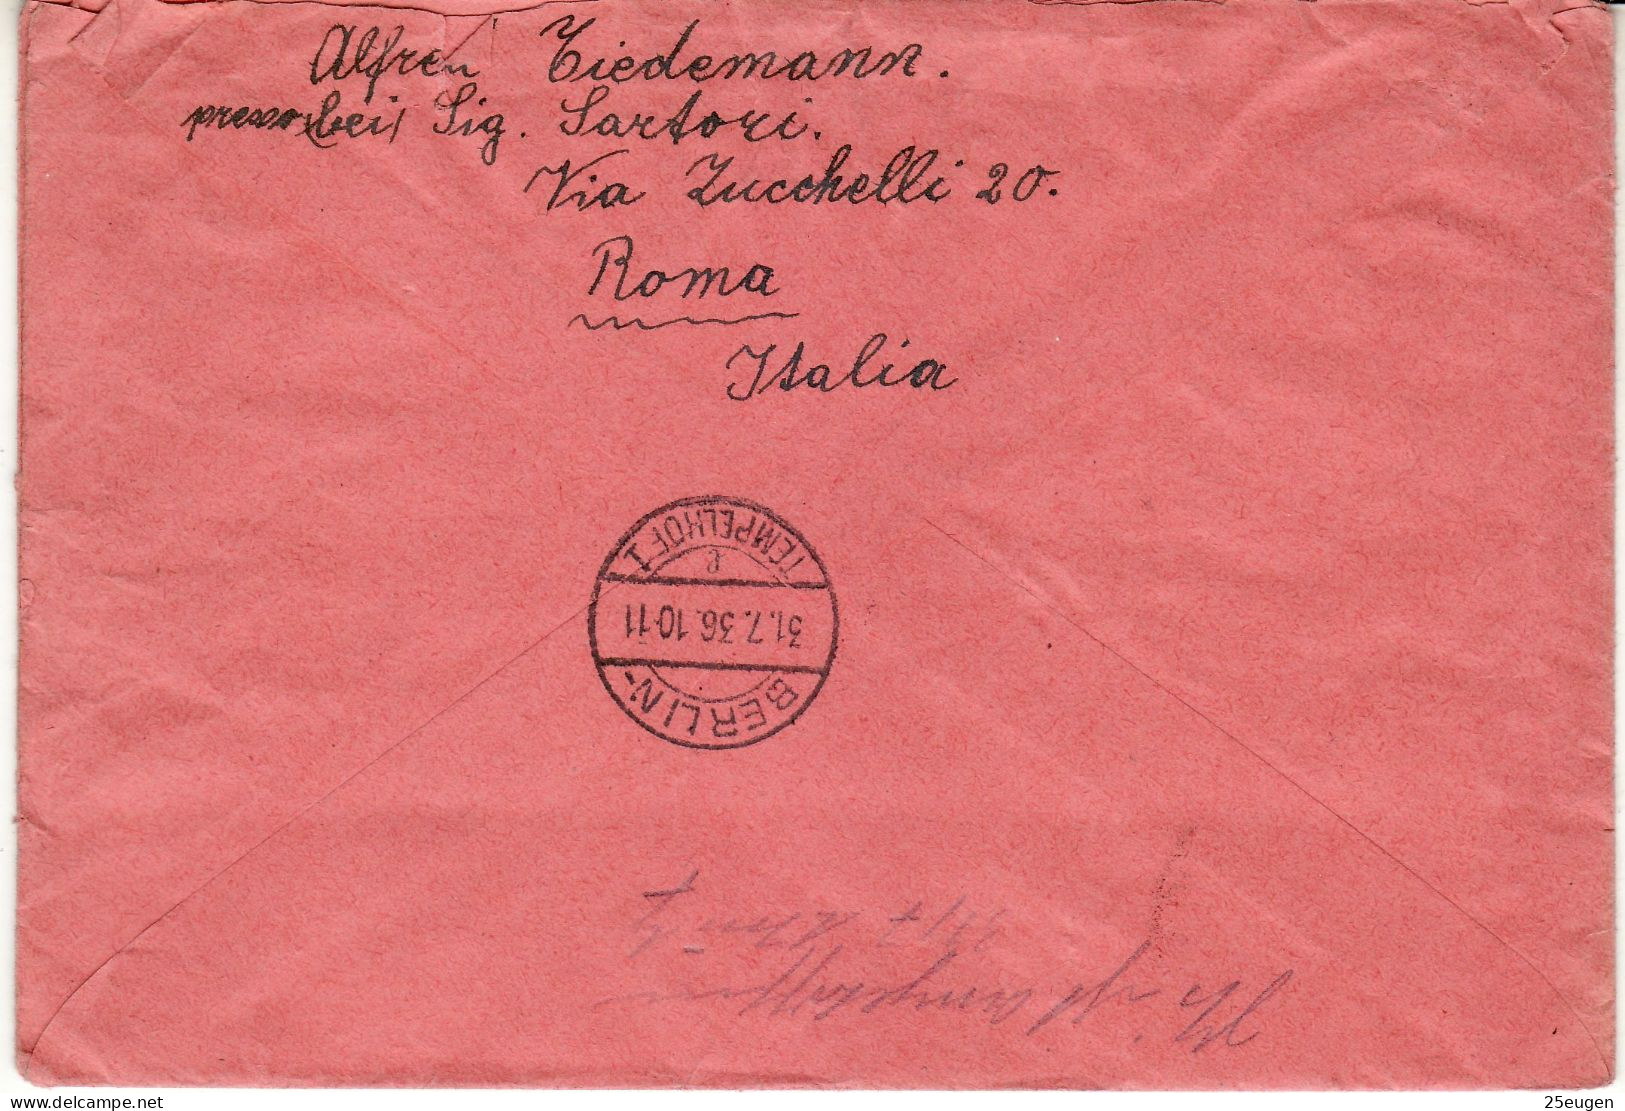 VATICAN 1936 R - LETTER  SENT FROM VATICAN  TO  BERLIN With Stamps MiNr 45-50 - Briefe U. Dokumente